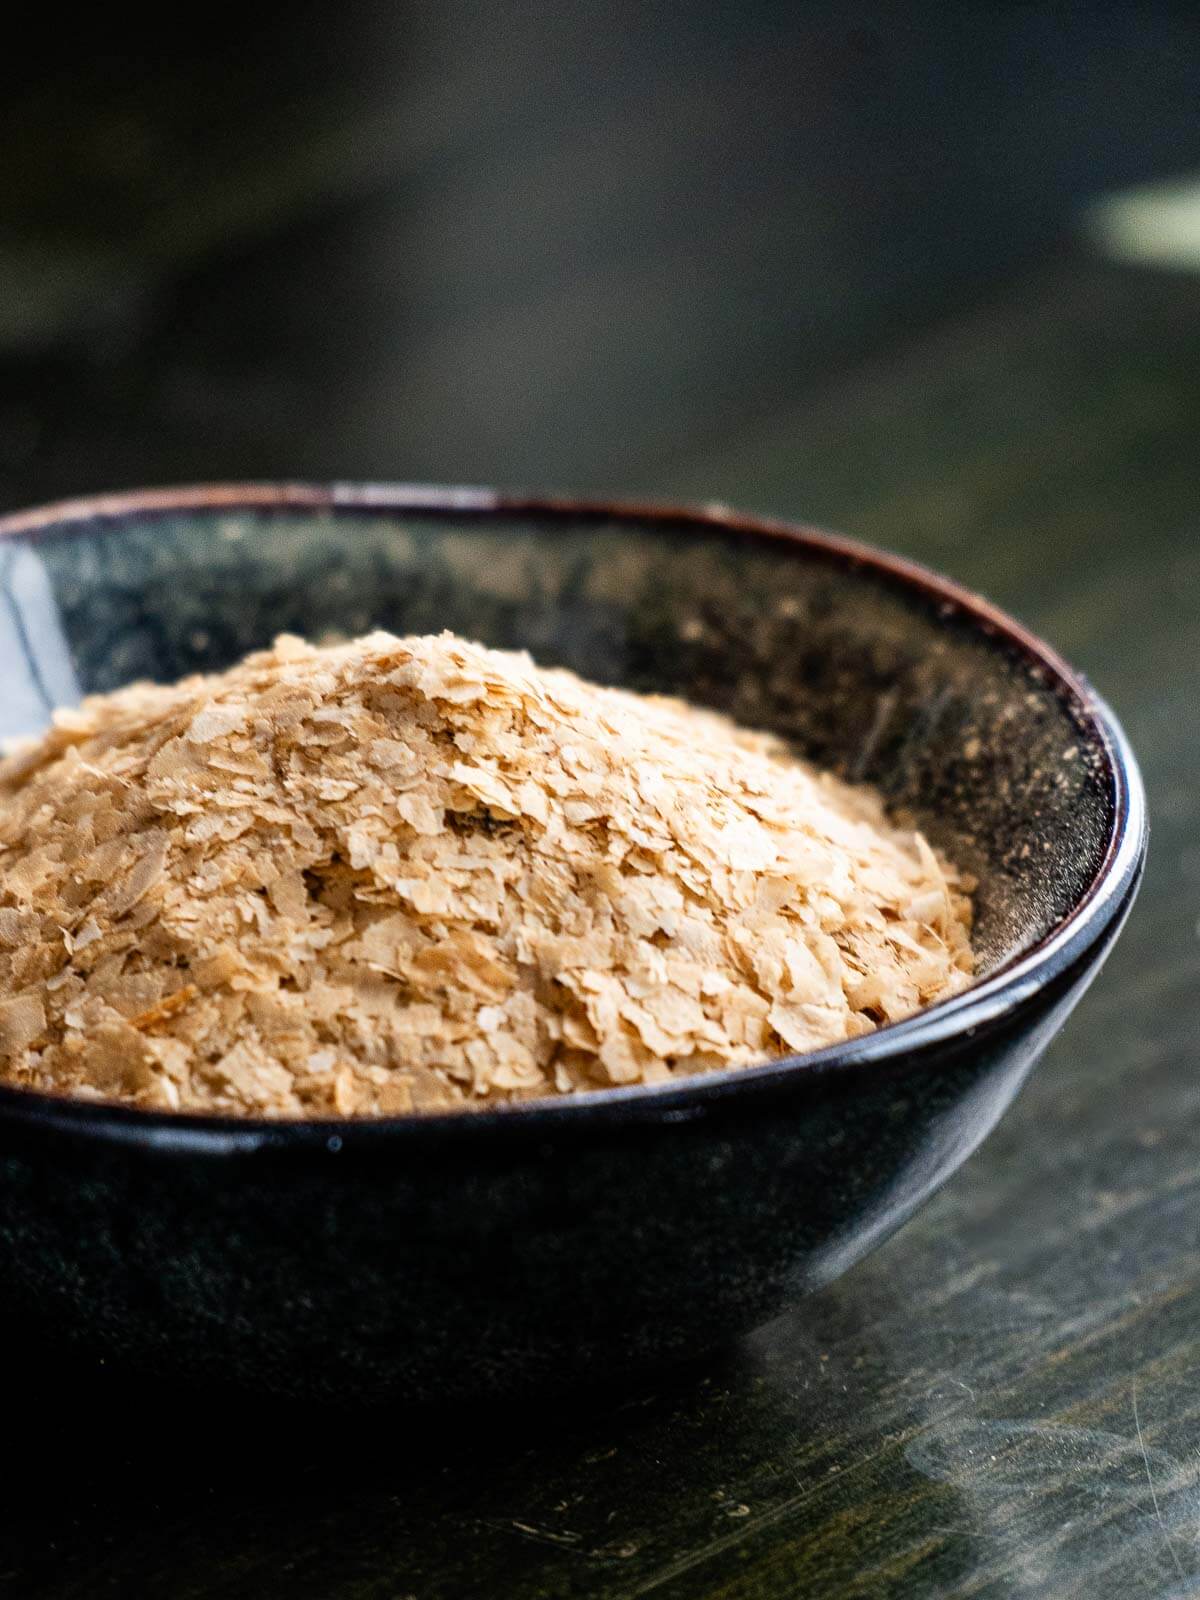 A small black bowl filled with nutritional yeast flakes placed on a dark surface, emphasizing the rich, golden color of the yeast against the contrasting background.